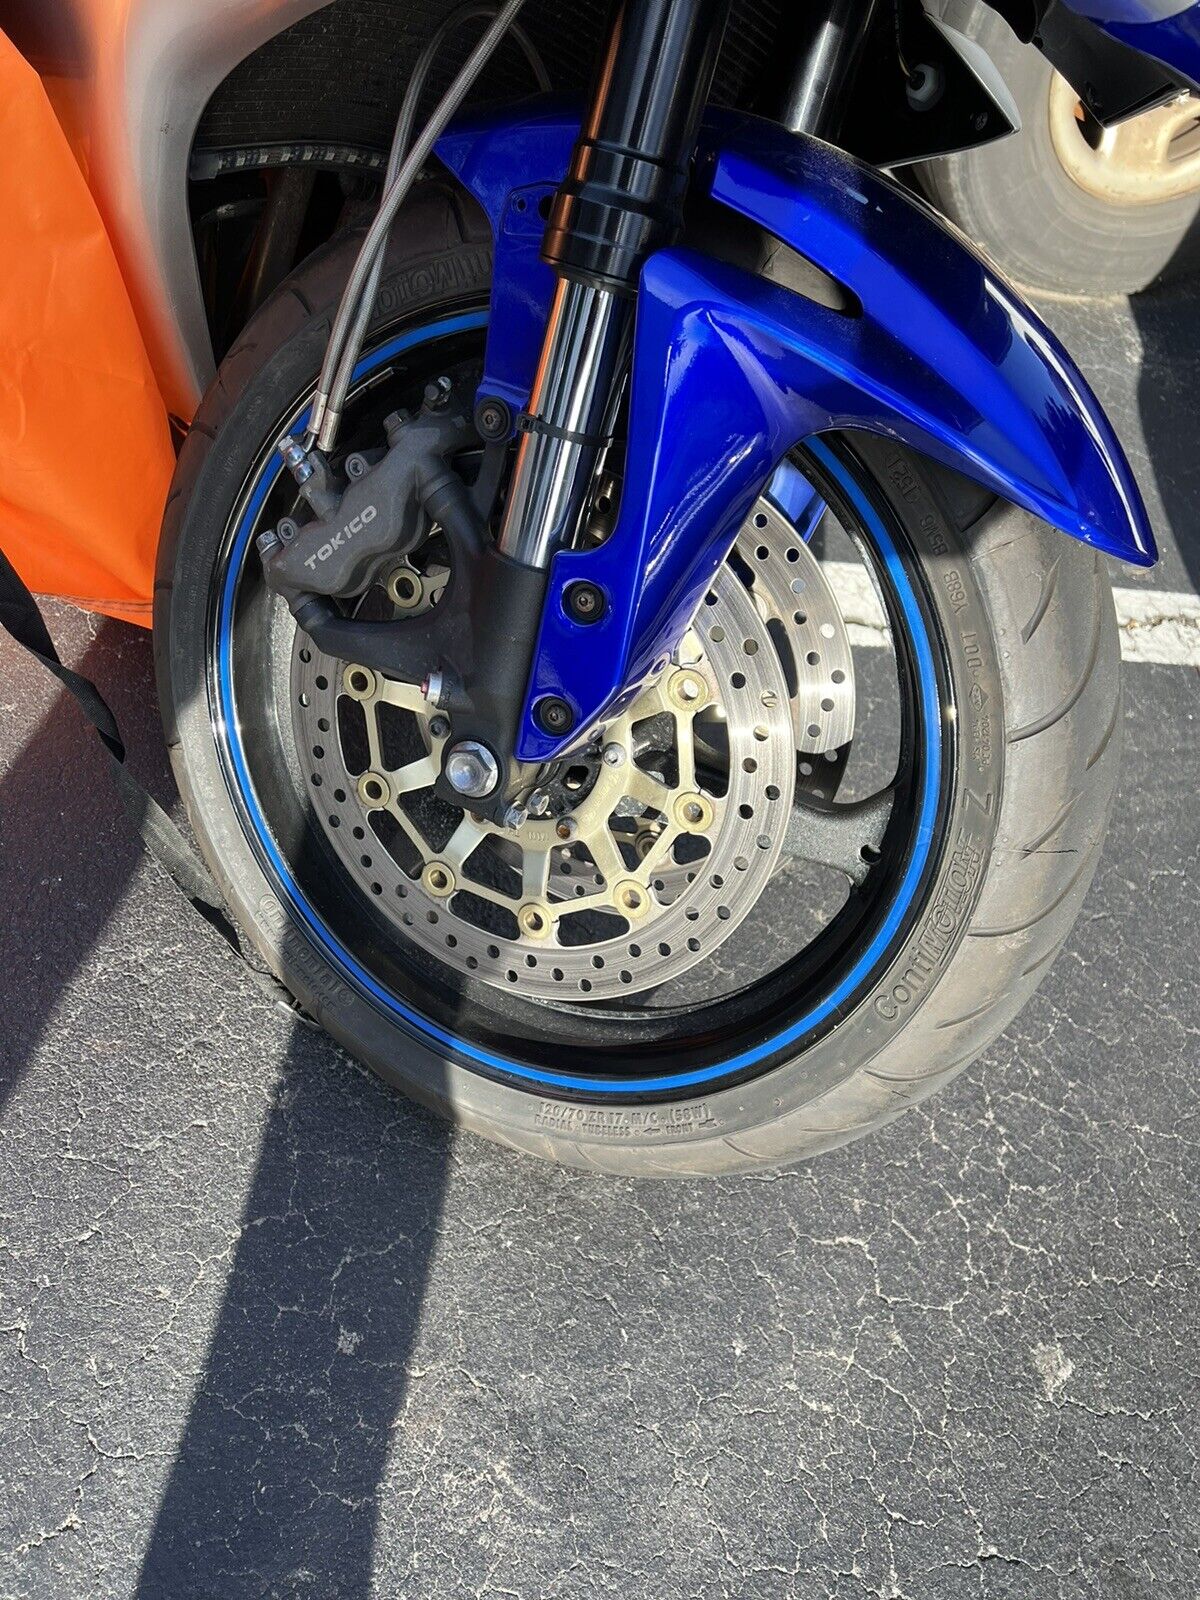 CBR600rr Wheels and Tires